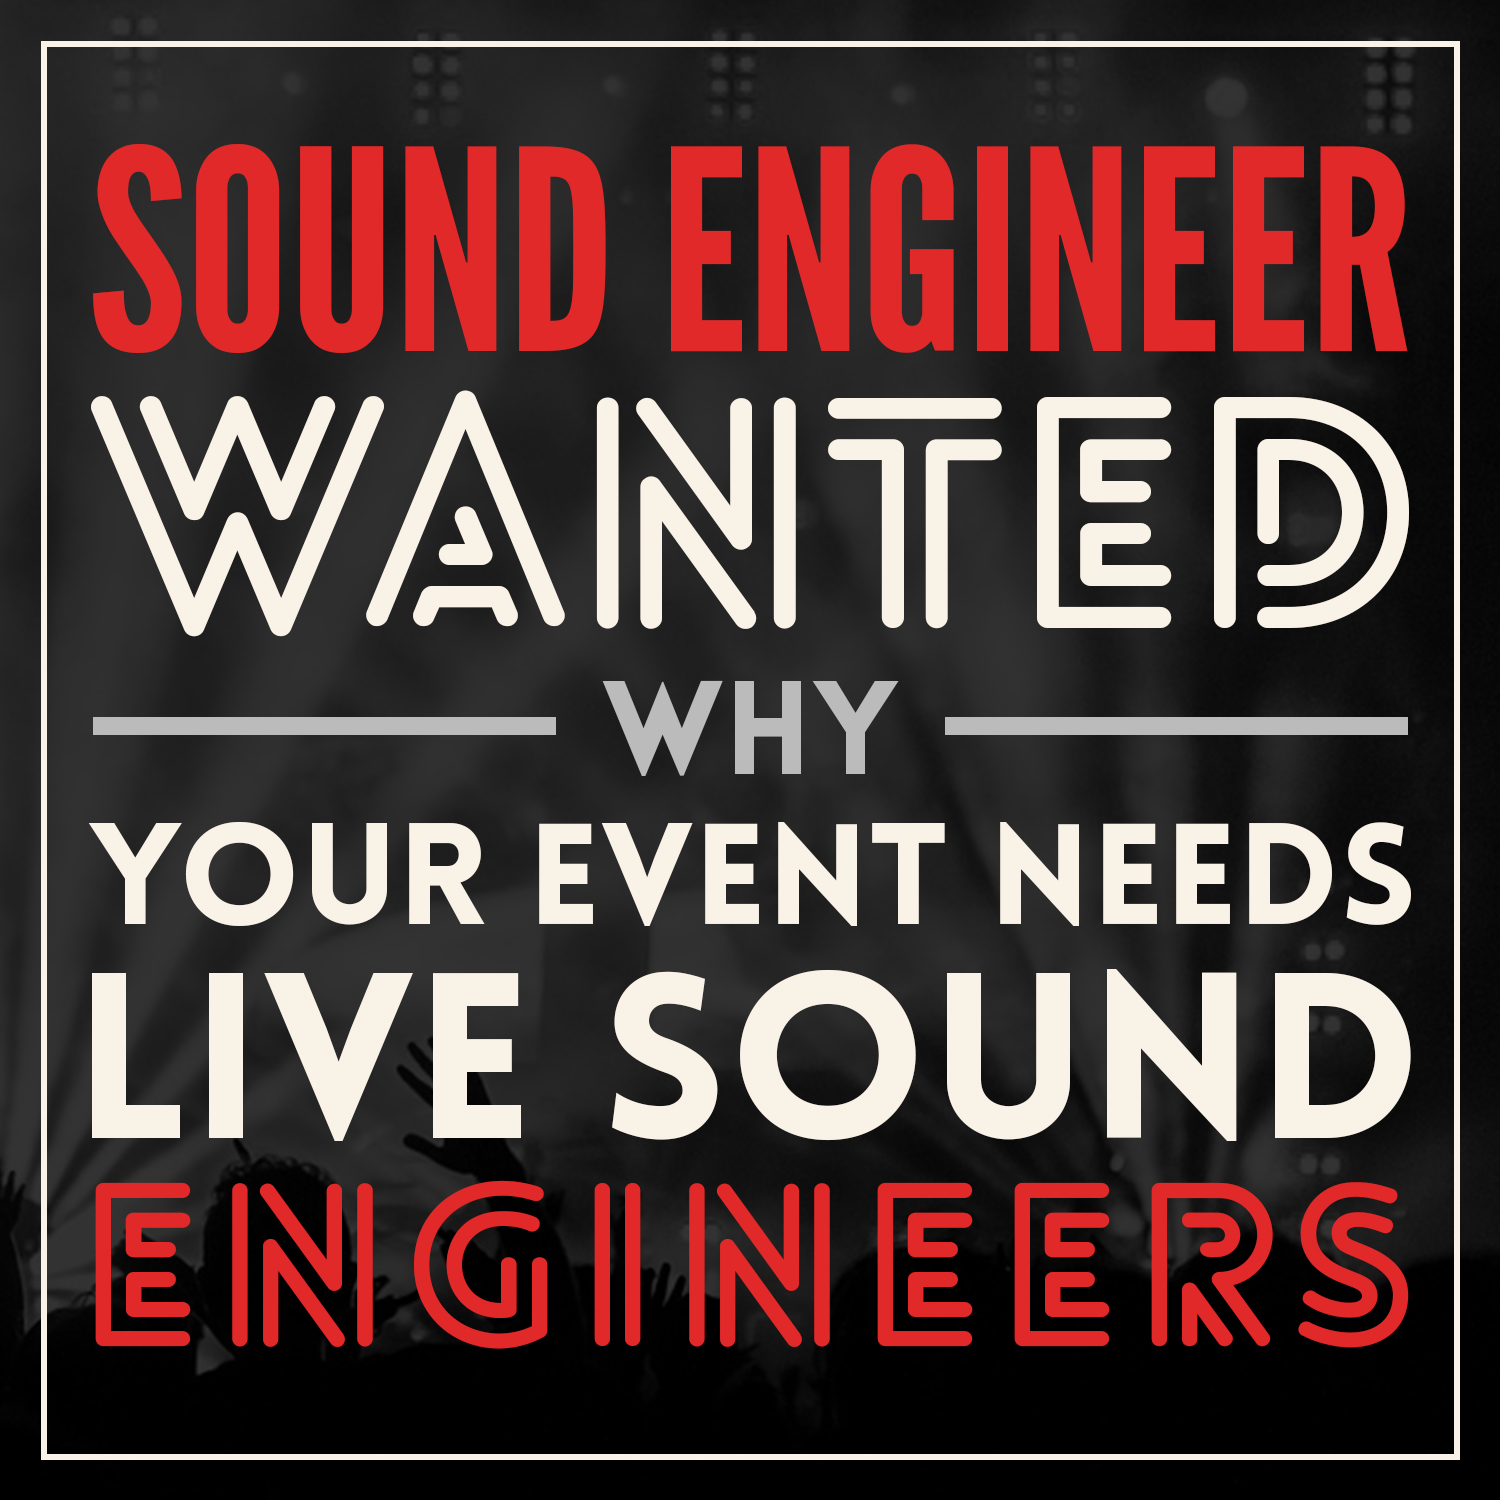 Why Your Event Needs Live Sound Engineers